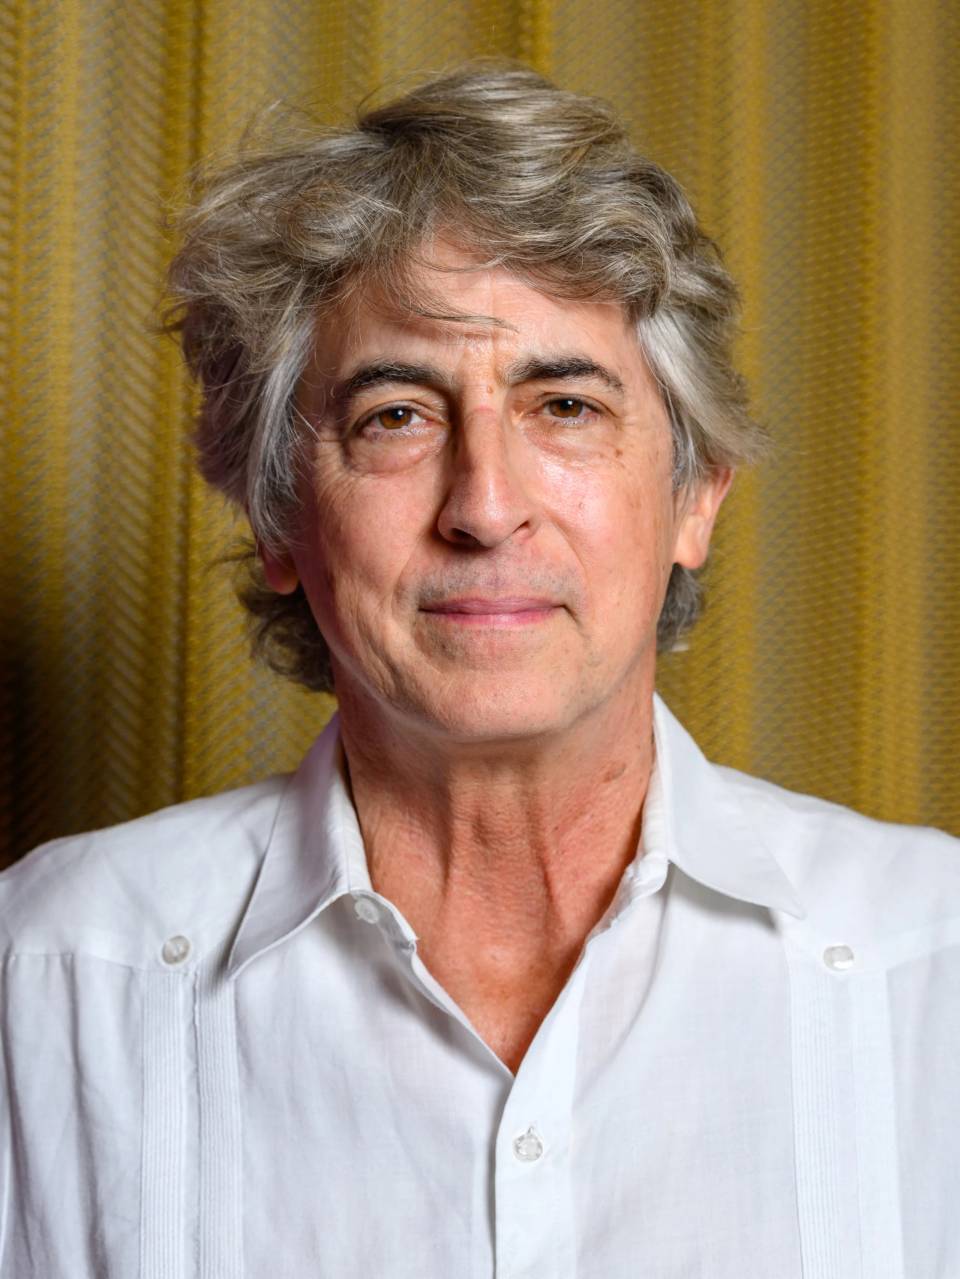 Legendary Director Alexander Payne staring into the camera. Not sure what he is thinking. But, I bet it's funny.